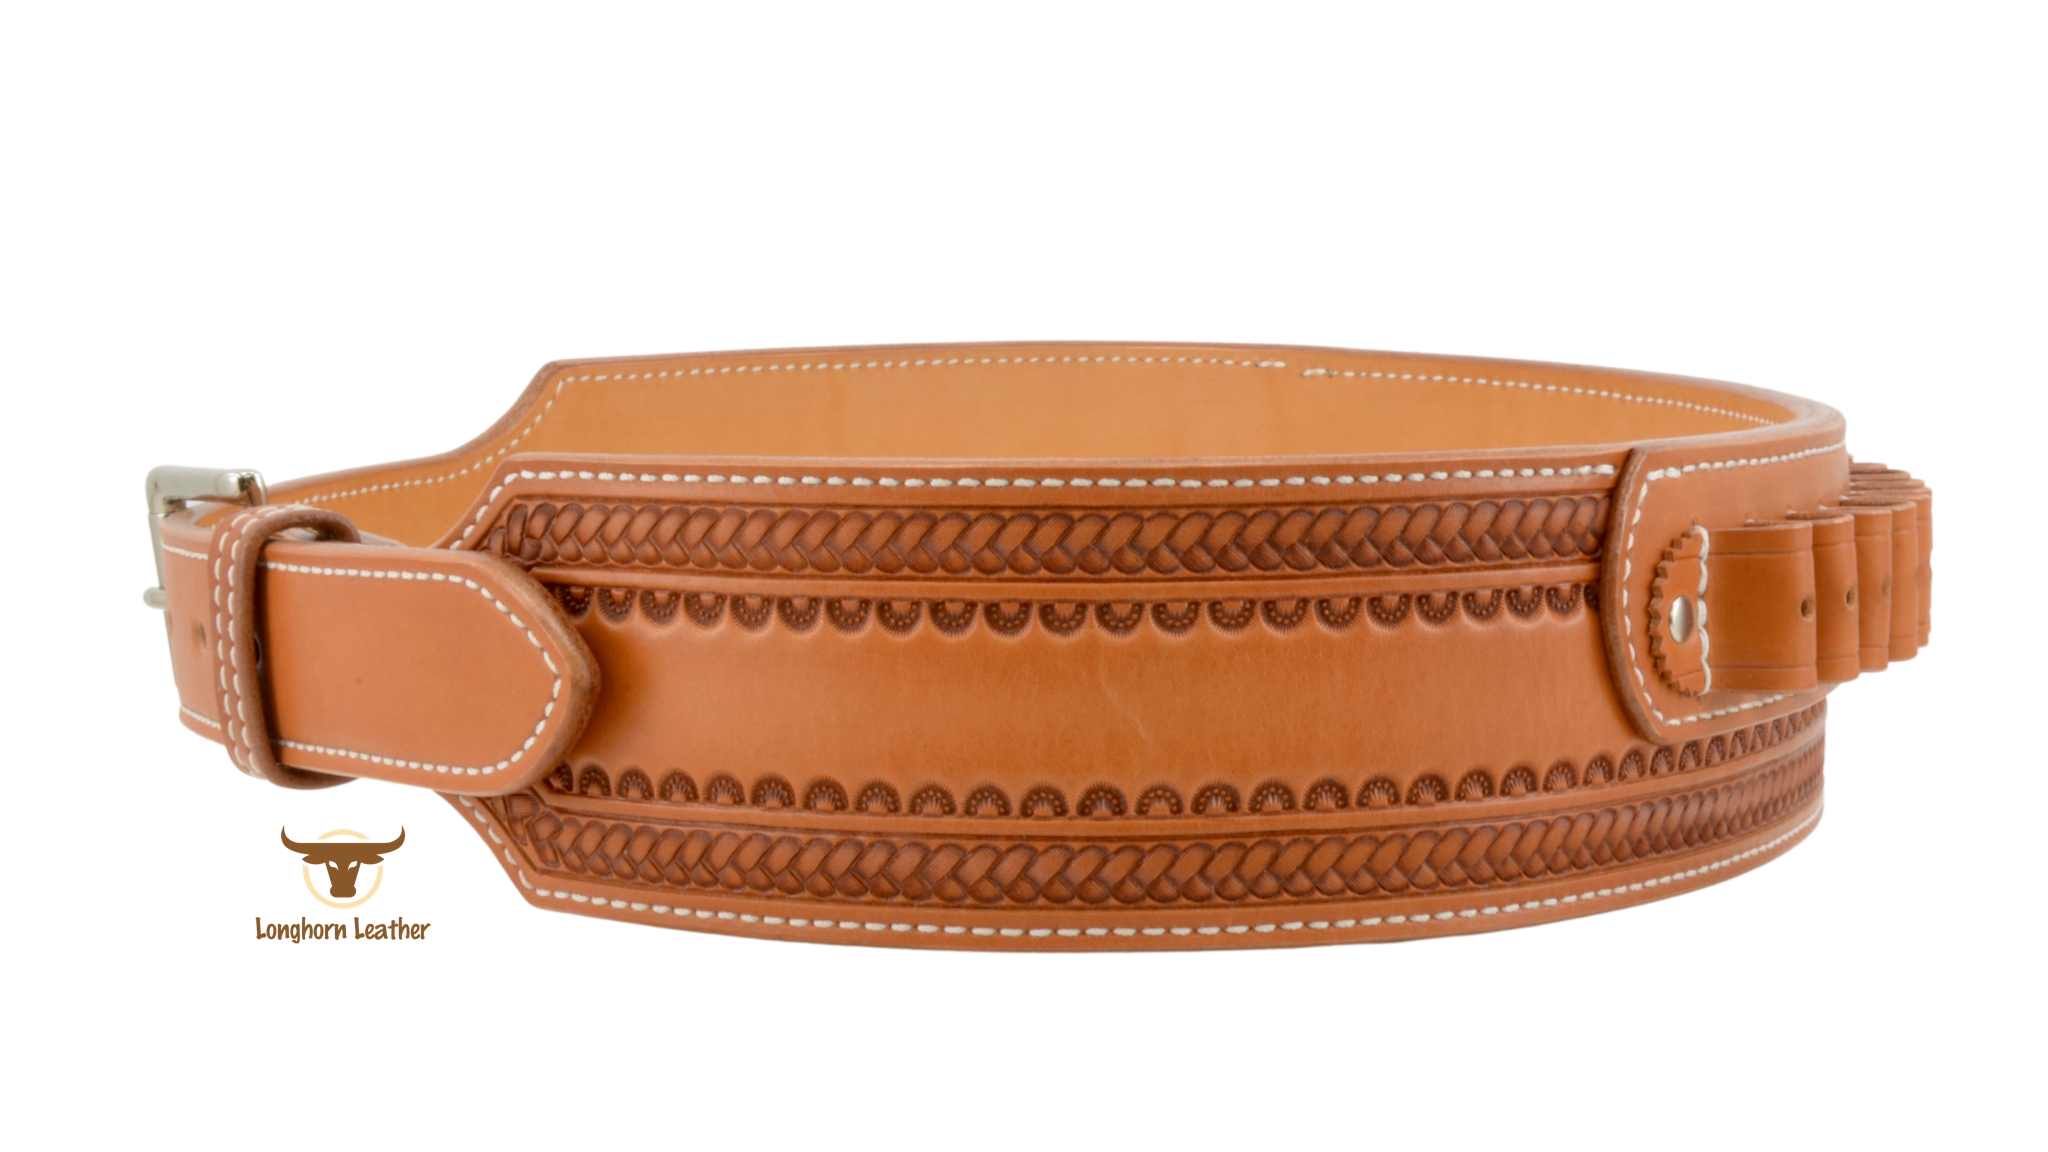 Custom leather cartridge belt featuring the "Sedona" design.  Individually handcrafted at Longhorn Leather AZ.